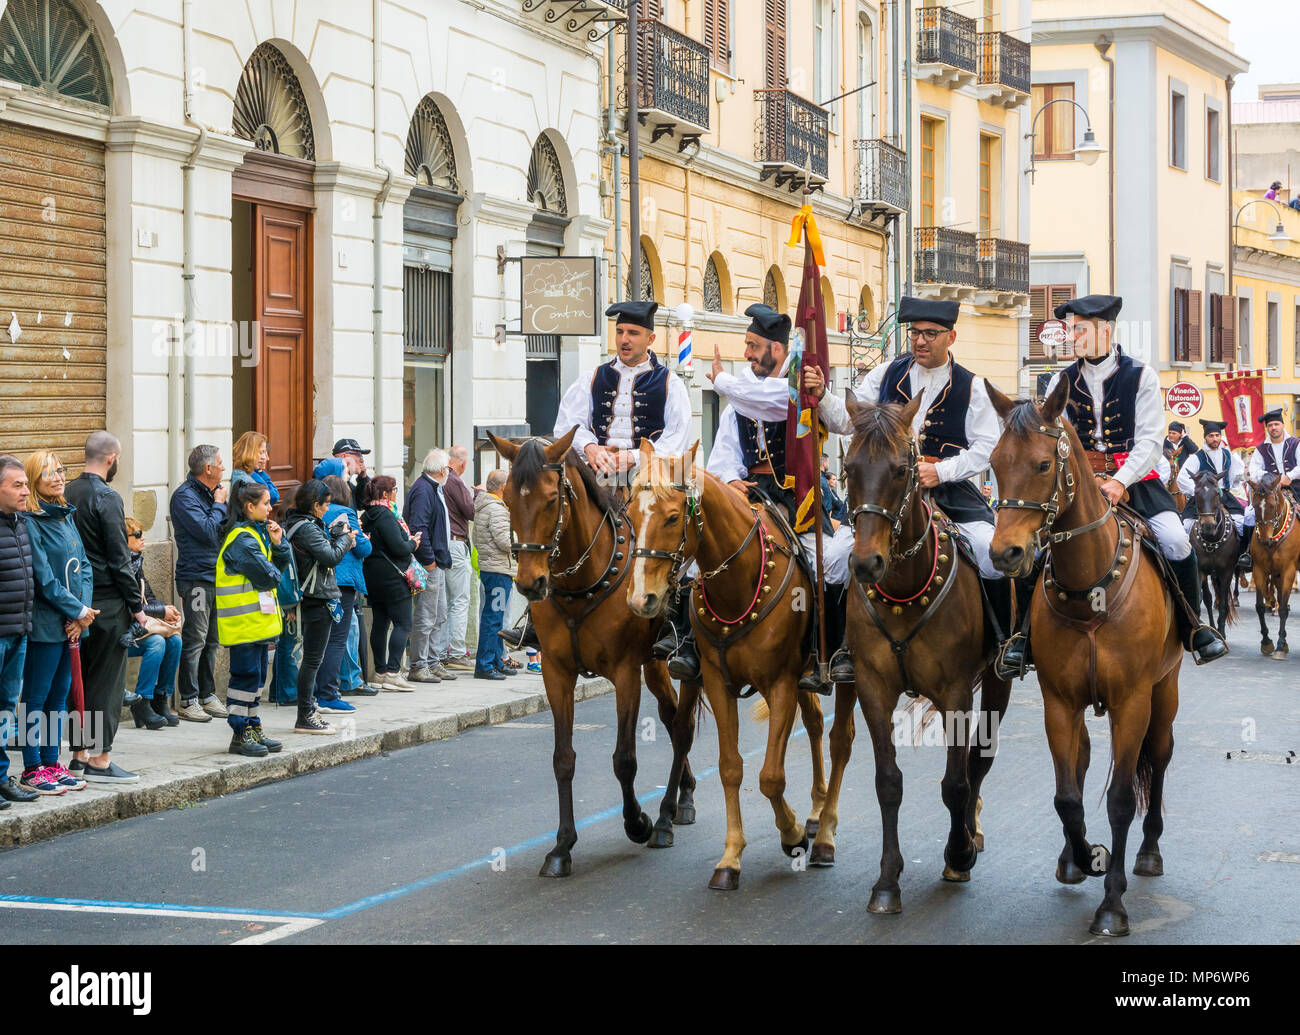 CAGLIARI, Italy - May 1, 2018: The famous Festival of Sant'Efisio in Sardinia. Group of people all wearing the traditional costumes of their village. Stock Photo